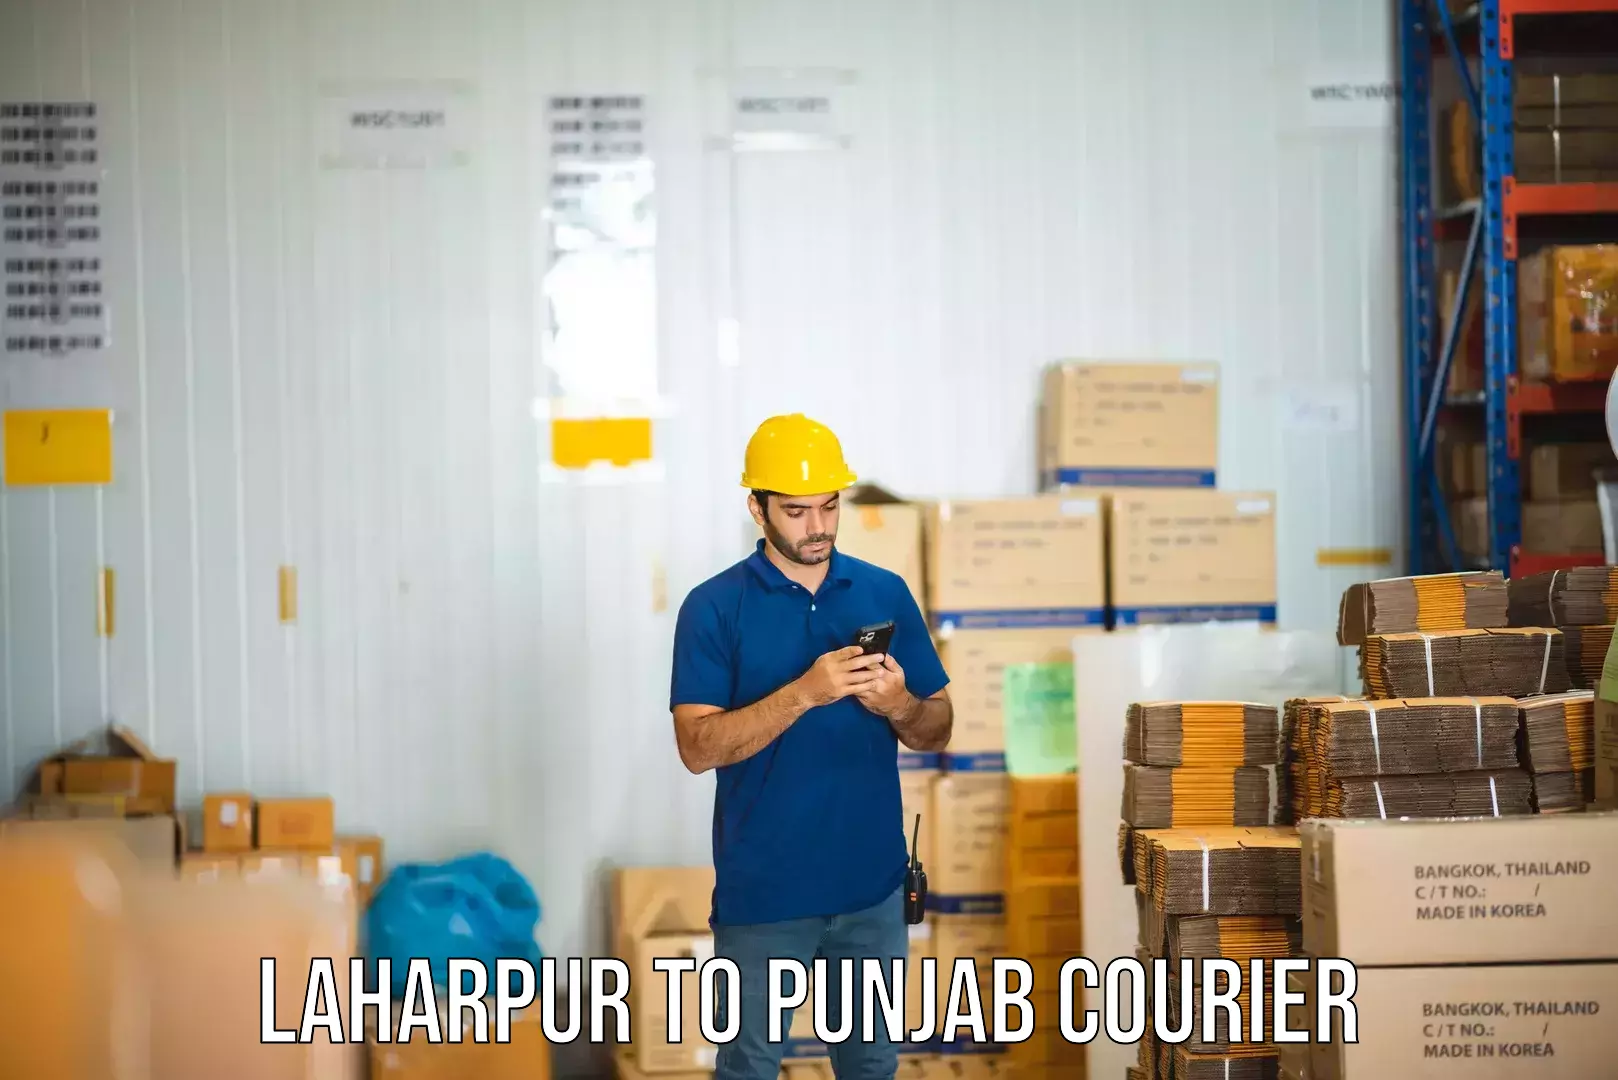 24/7 shipping services in Laharpur to Sirhind Fatehgarh